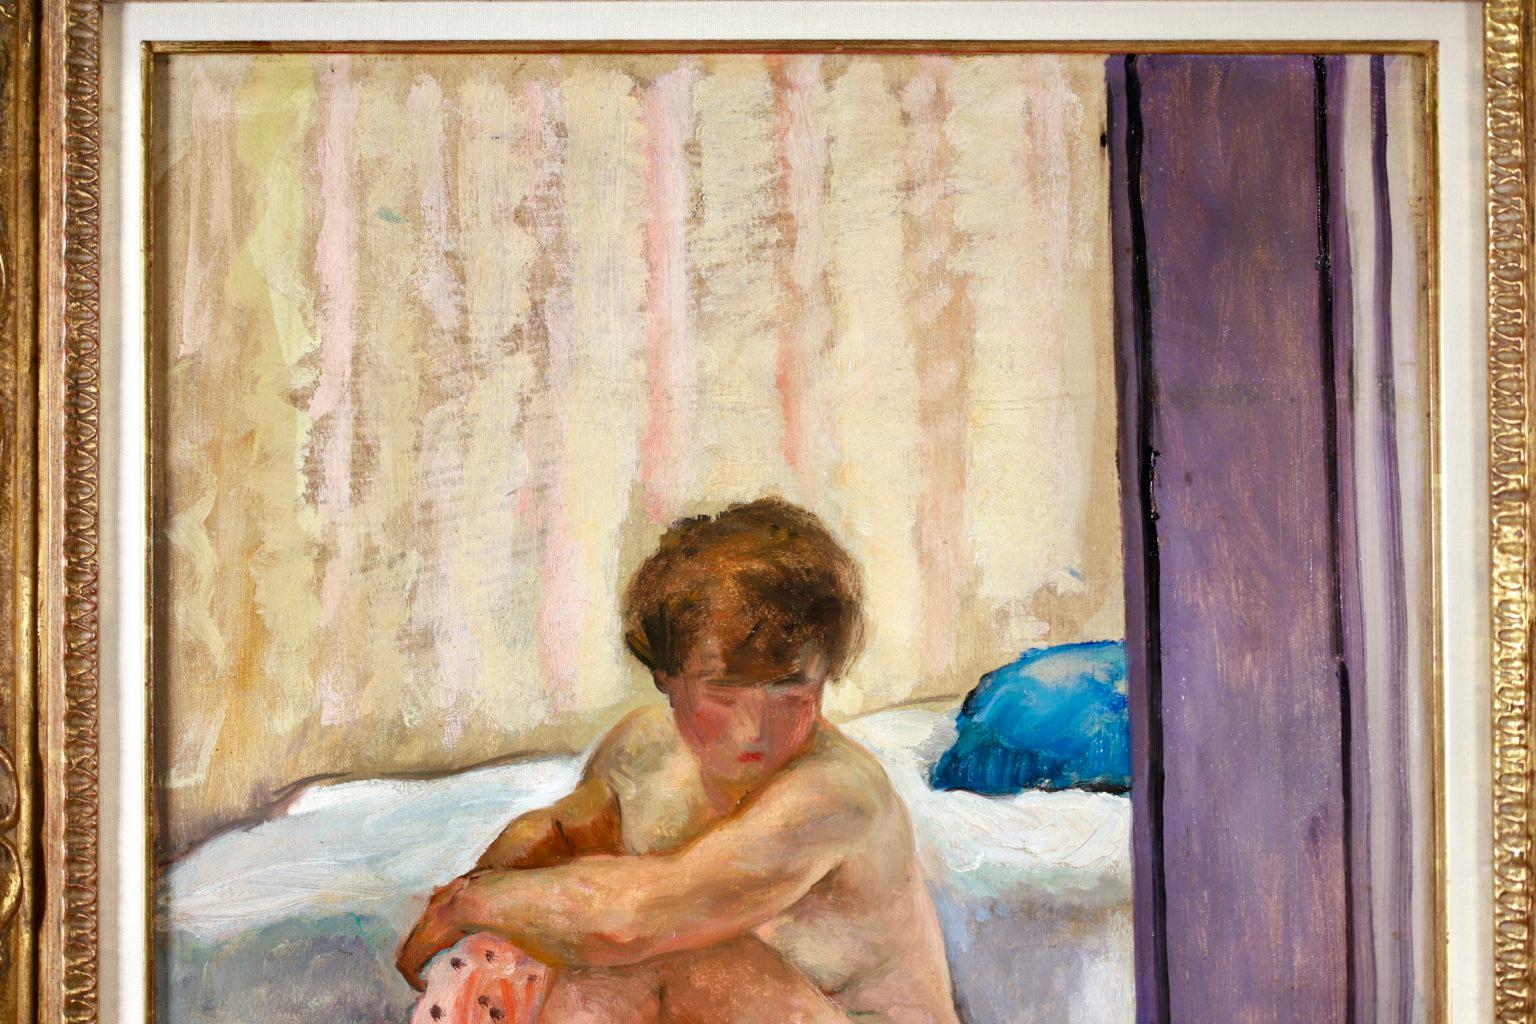 A wonderful oil on canvas circa 1920 by French post impressionist painter Henri Lebasque. The work depicts a nude sitting on a red patterned rug in front a bed. A beautifully brushed piece.

Signature:
Signed lower right

Dimensions:
Framed: